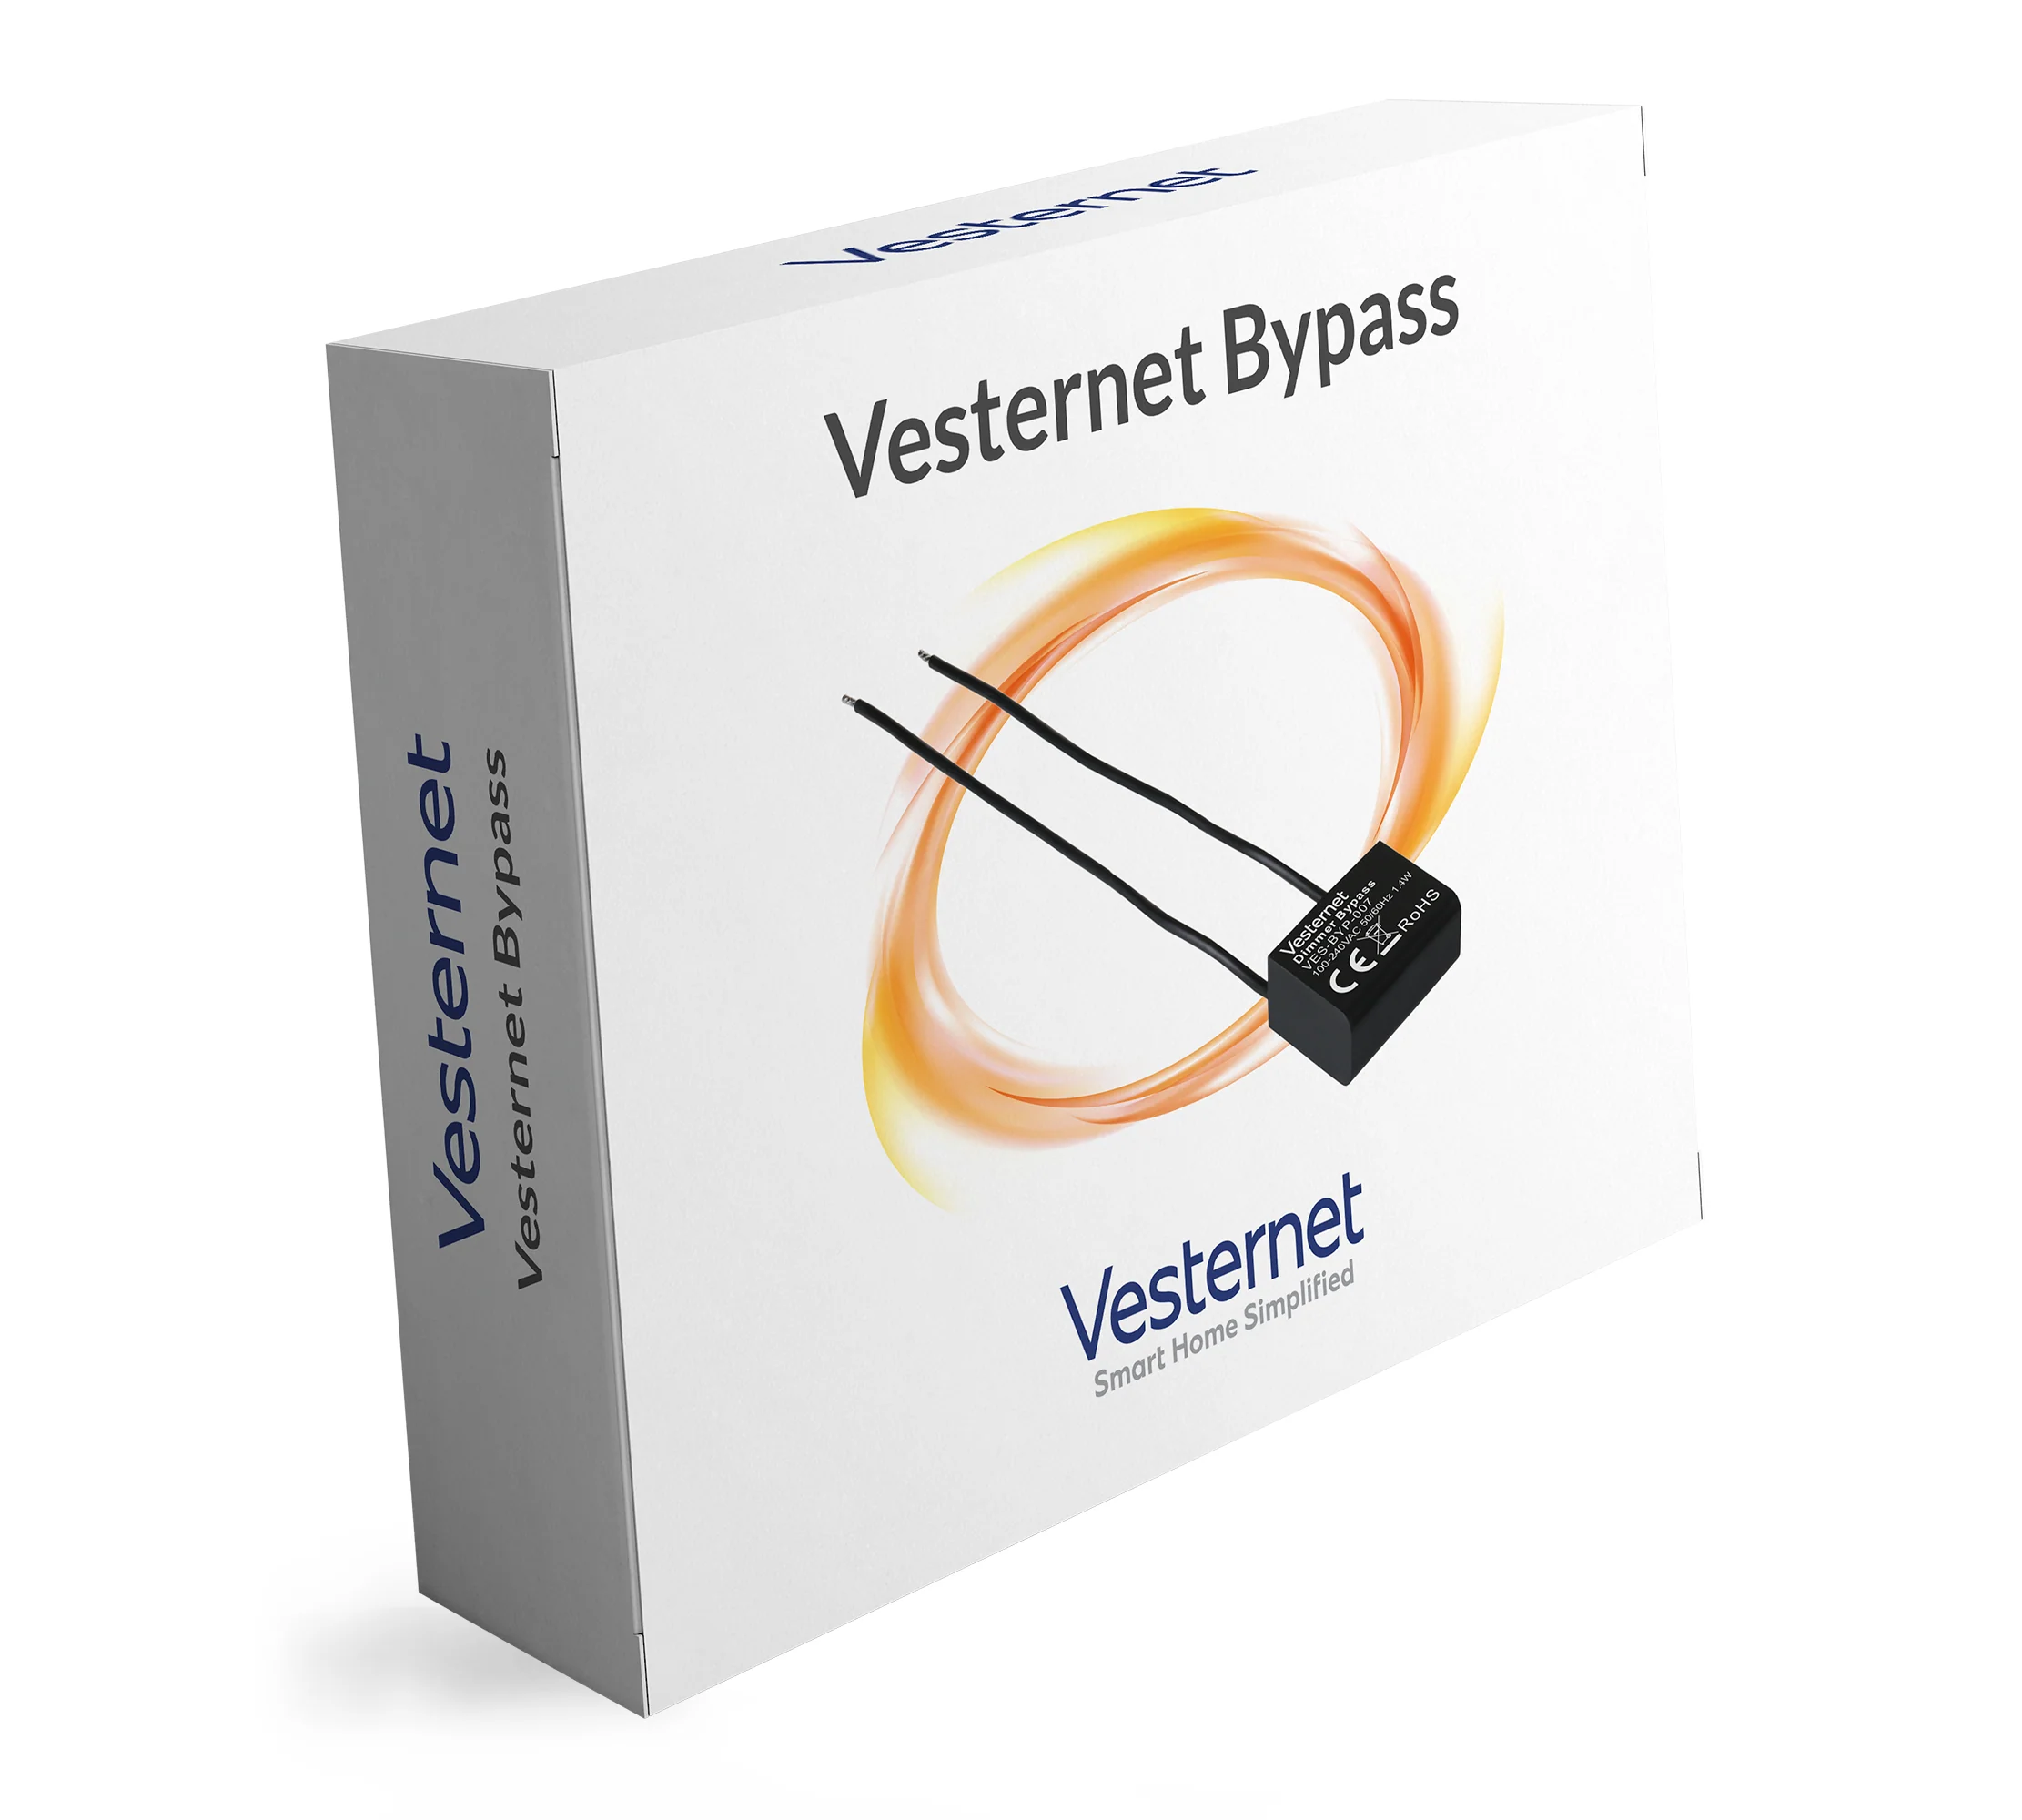 For 2 lighting circuits, both with their own Vesternet Dimmer, can you use 1 bypass for both?